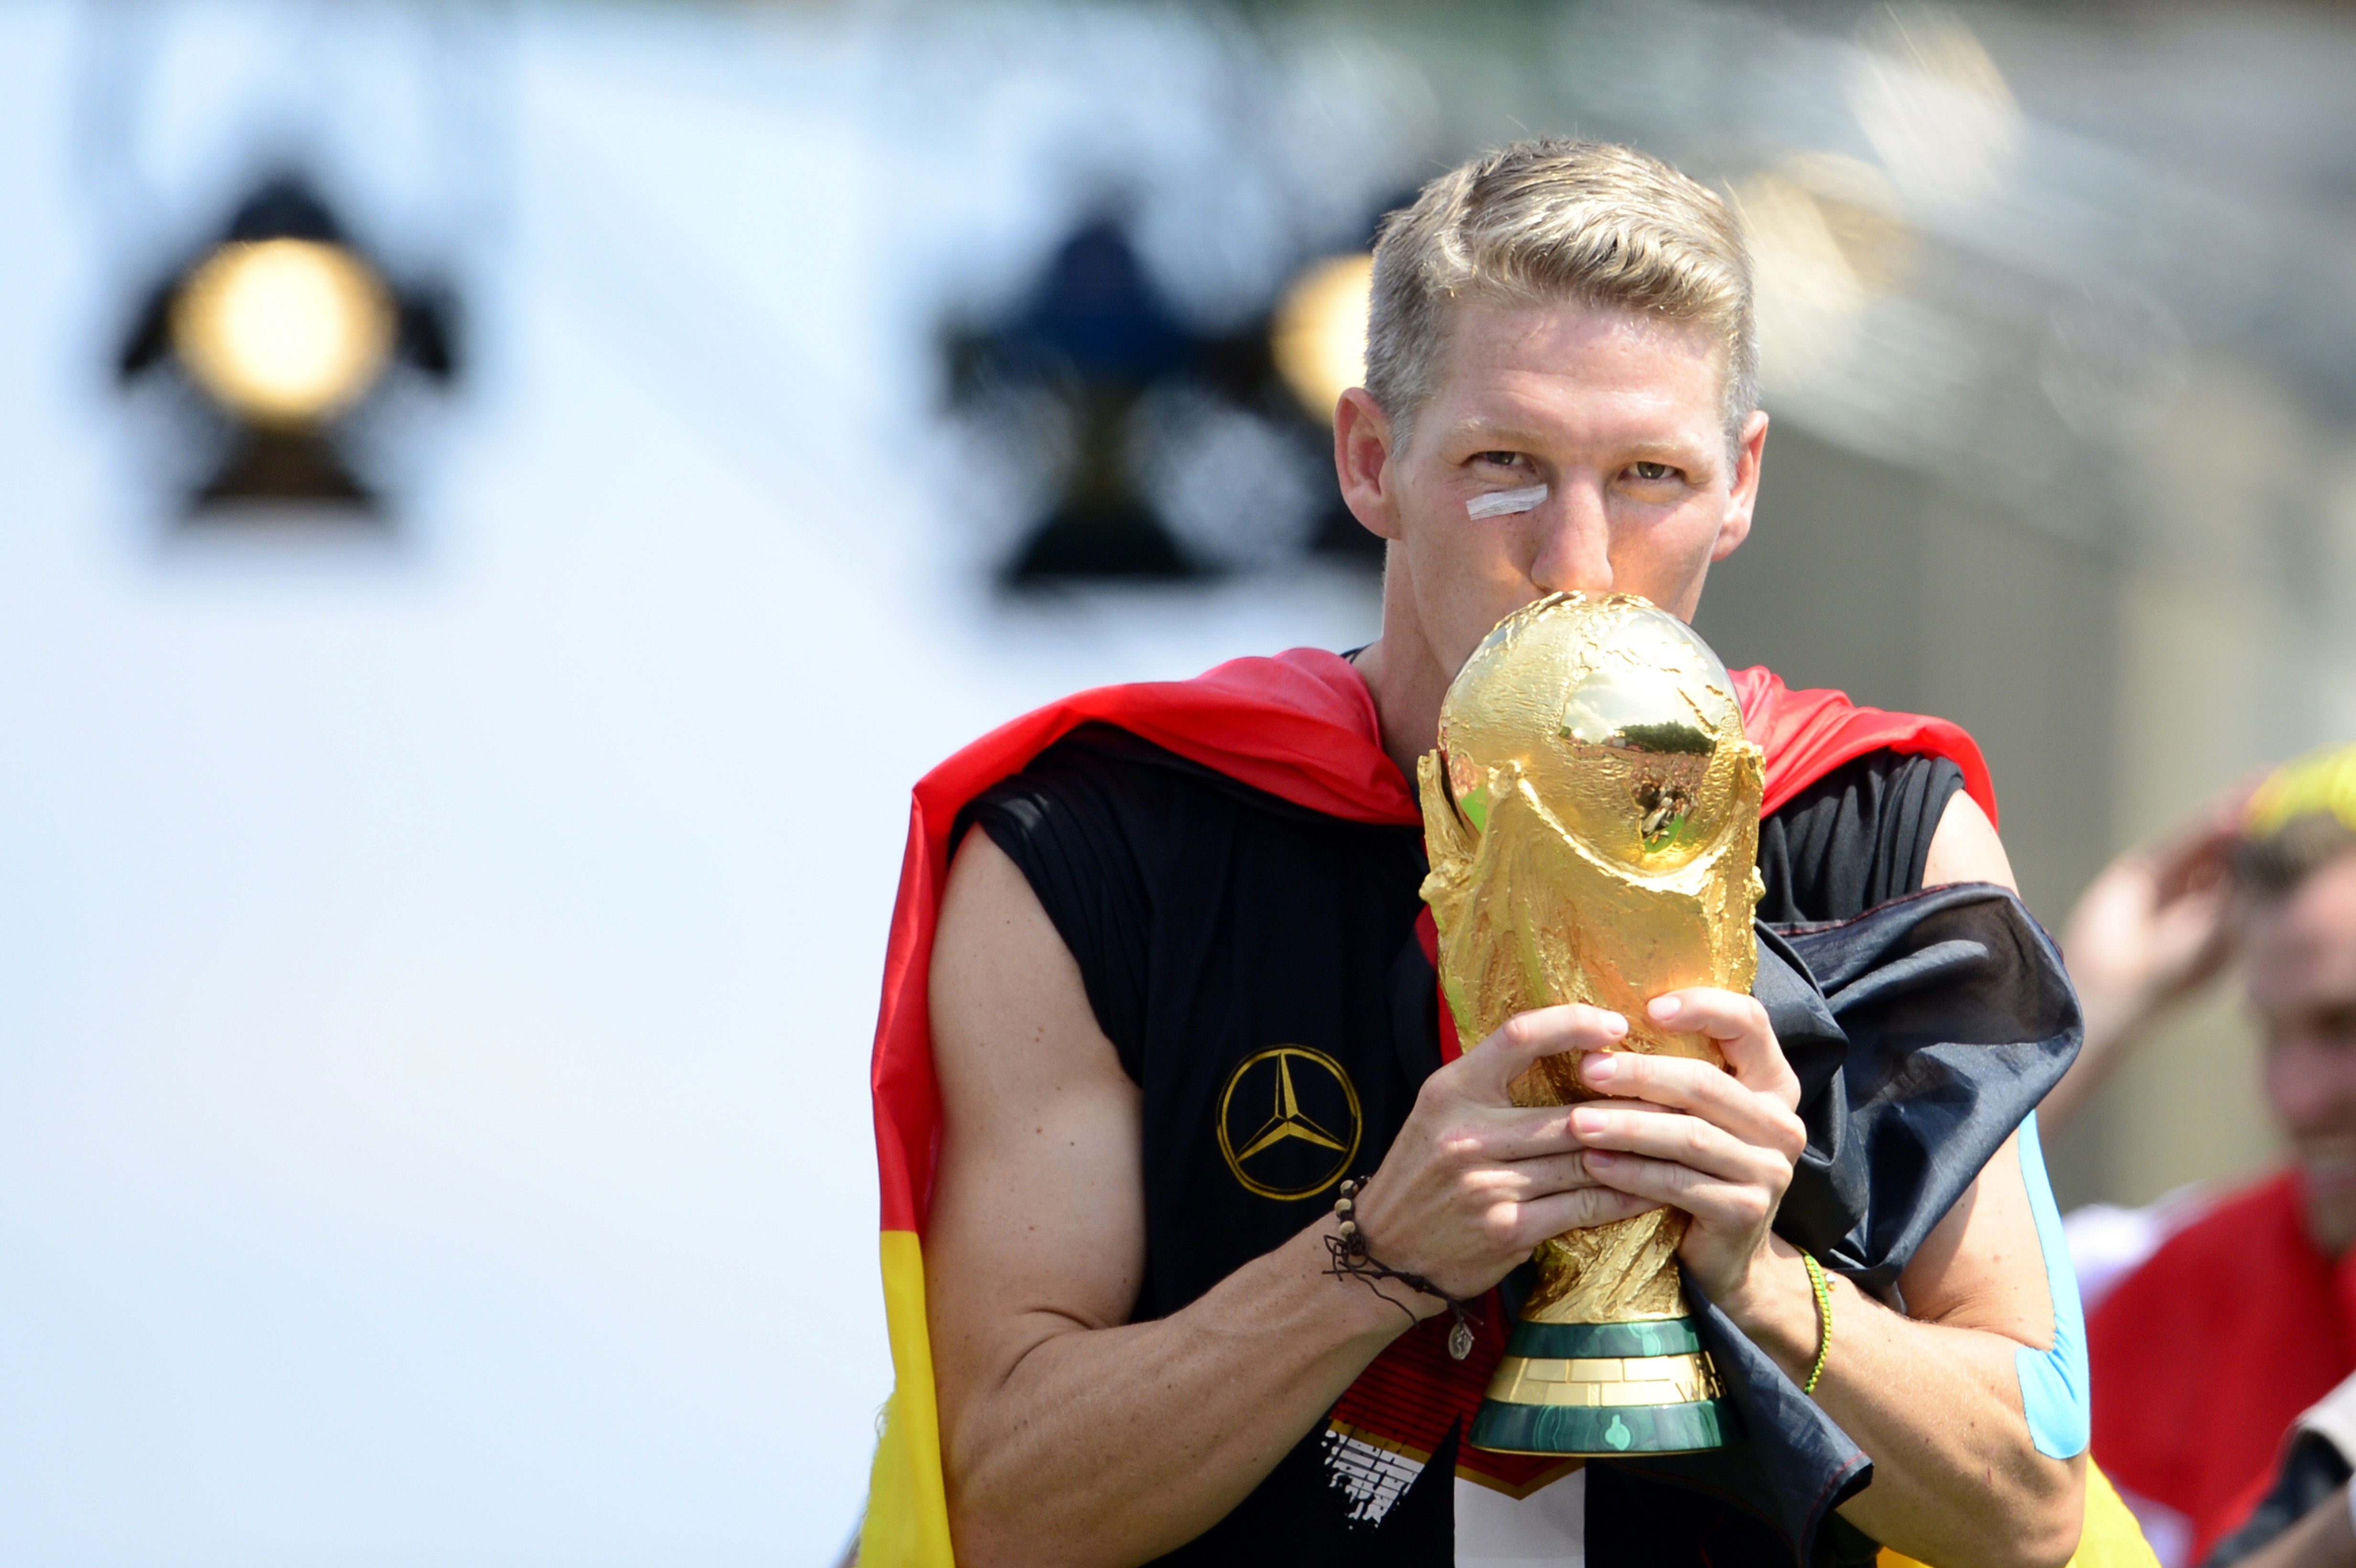 Germany reveal World Cup 2014 trophy damage during wild victory